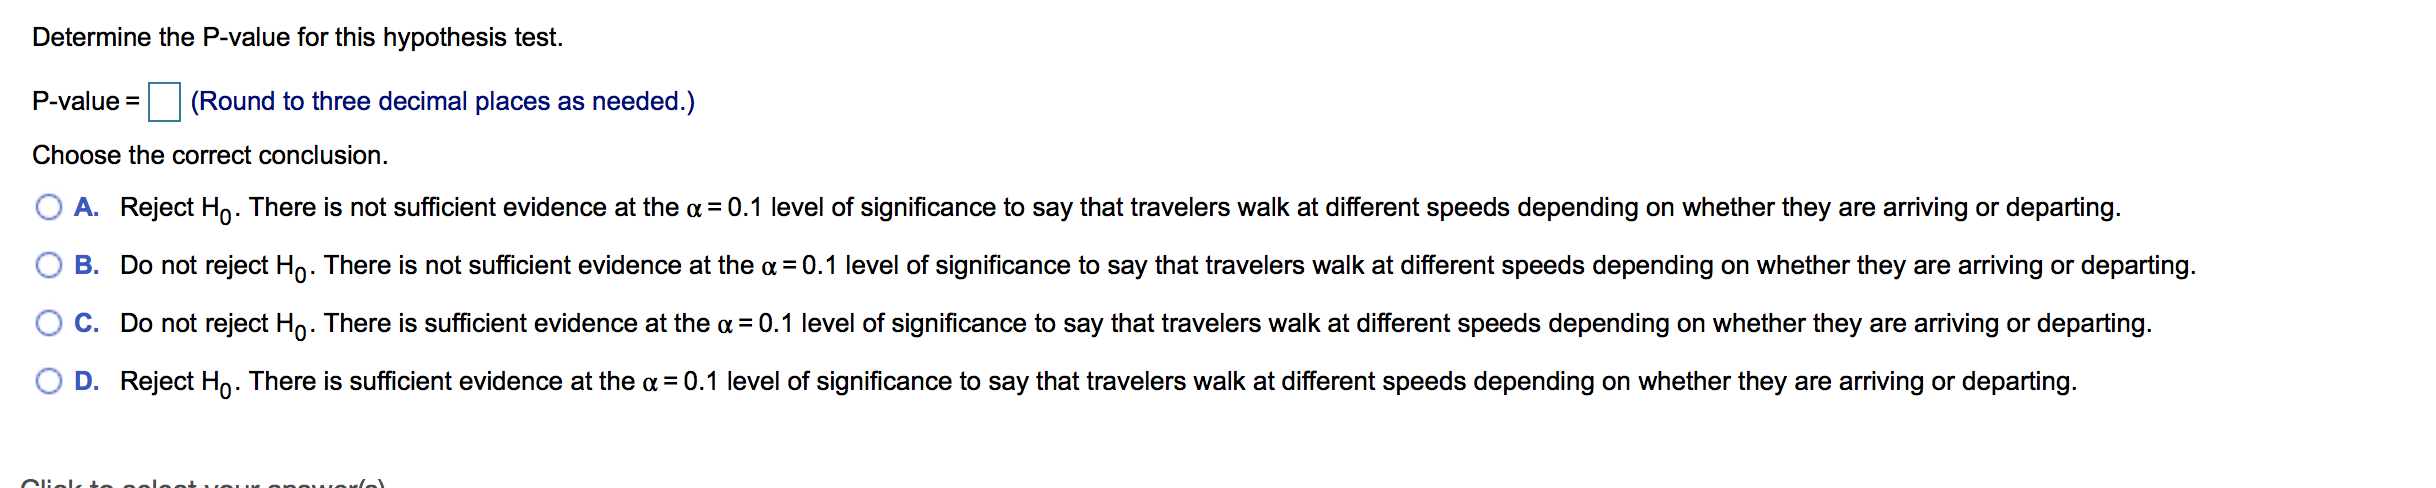 Determine the P-value for this hypothesis test.
P-value
(Round to three decimal places as needed.)
Choose the correct conclusion.
A. Reject Ho. There is not sufficient evidence at the a
0.1 level of significance to say that travelers walk at different speeds depending on whether they are arriving or departing.
B. Do not reject Ho. There iss not sufficient evidence at the a 0.1 level of significance to say that travelers walk at different speeds depending on whether they are arriving or departing
C. Do not reject Ho. There is sufficient evidence at the a
0.1 level of significance to say that travelers walk at different speeds depending on whether they are arriving or departing
Reject Ho. There is sufficient evidence at the a
D.
0.1 level of significance to say that travelers walk at different speeds depending on whether they are arriving or departing.
